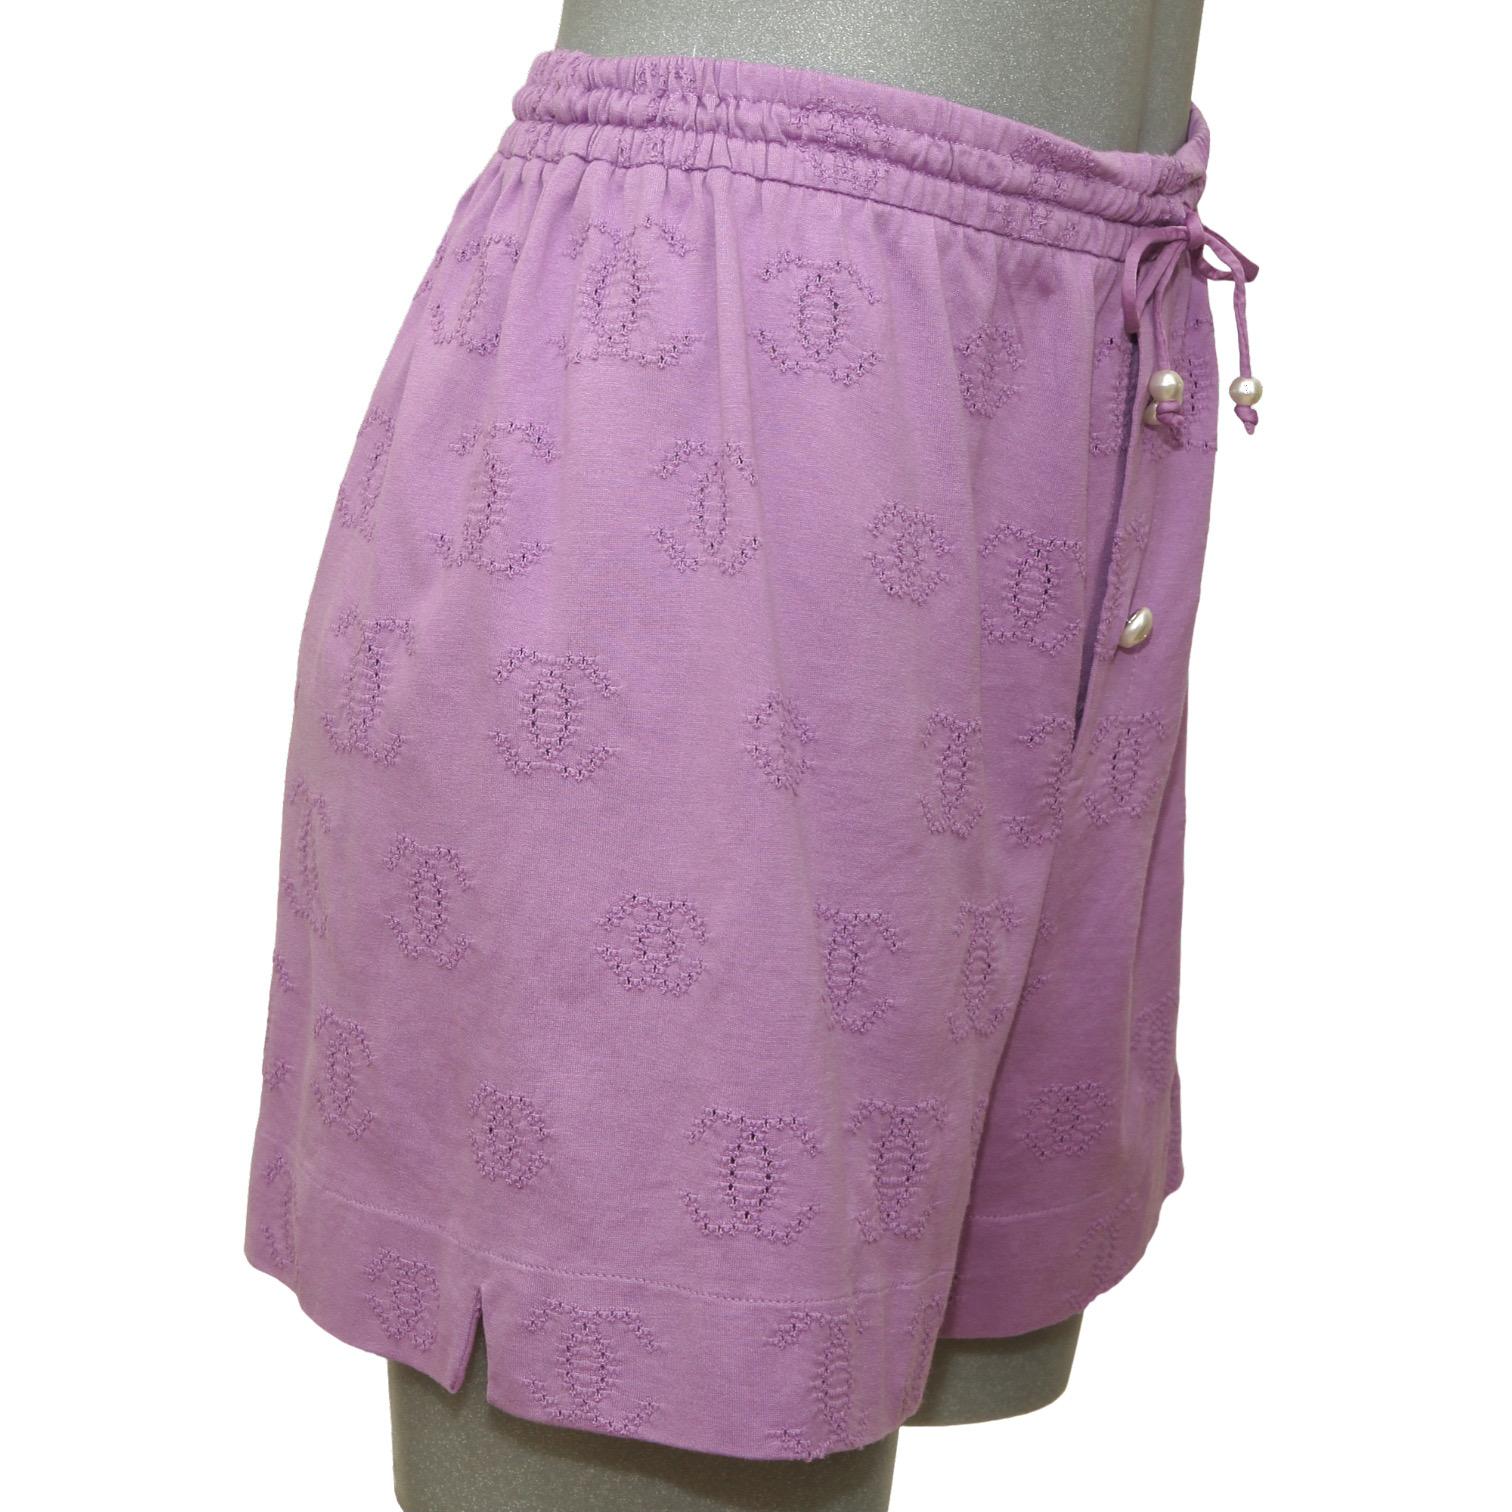 GUARANTEED AUTHENTIC CHANEL 22S CROPPED PURPLE LOGO SHORTS

Retailed excluding sales tax $1,800.

Matching Top Available In A Separate Listing.

Design:
- Purple logo CC.
- Slip on.
- Elastic Waist.
- CC faux pearls.

Size: XS

Material: 100%